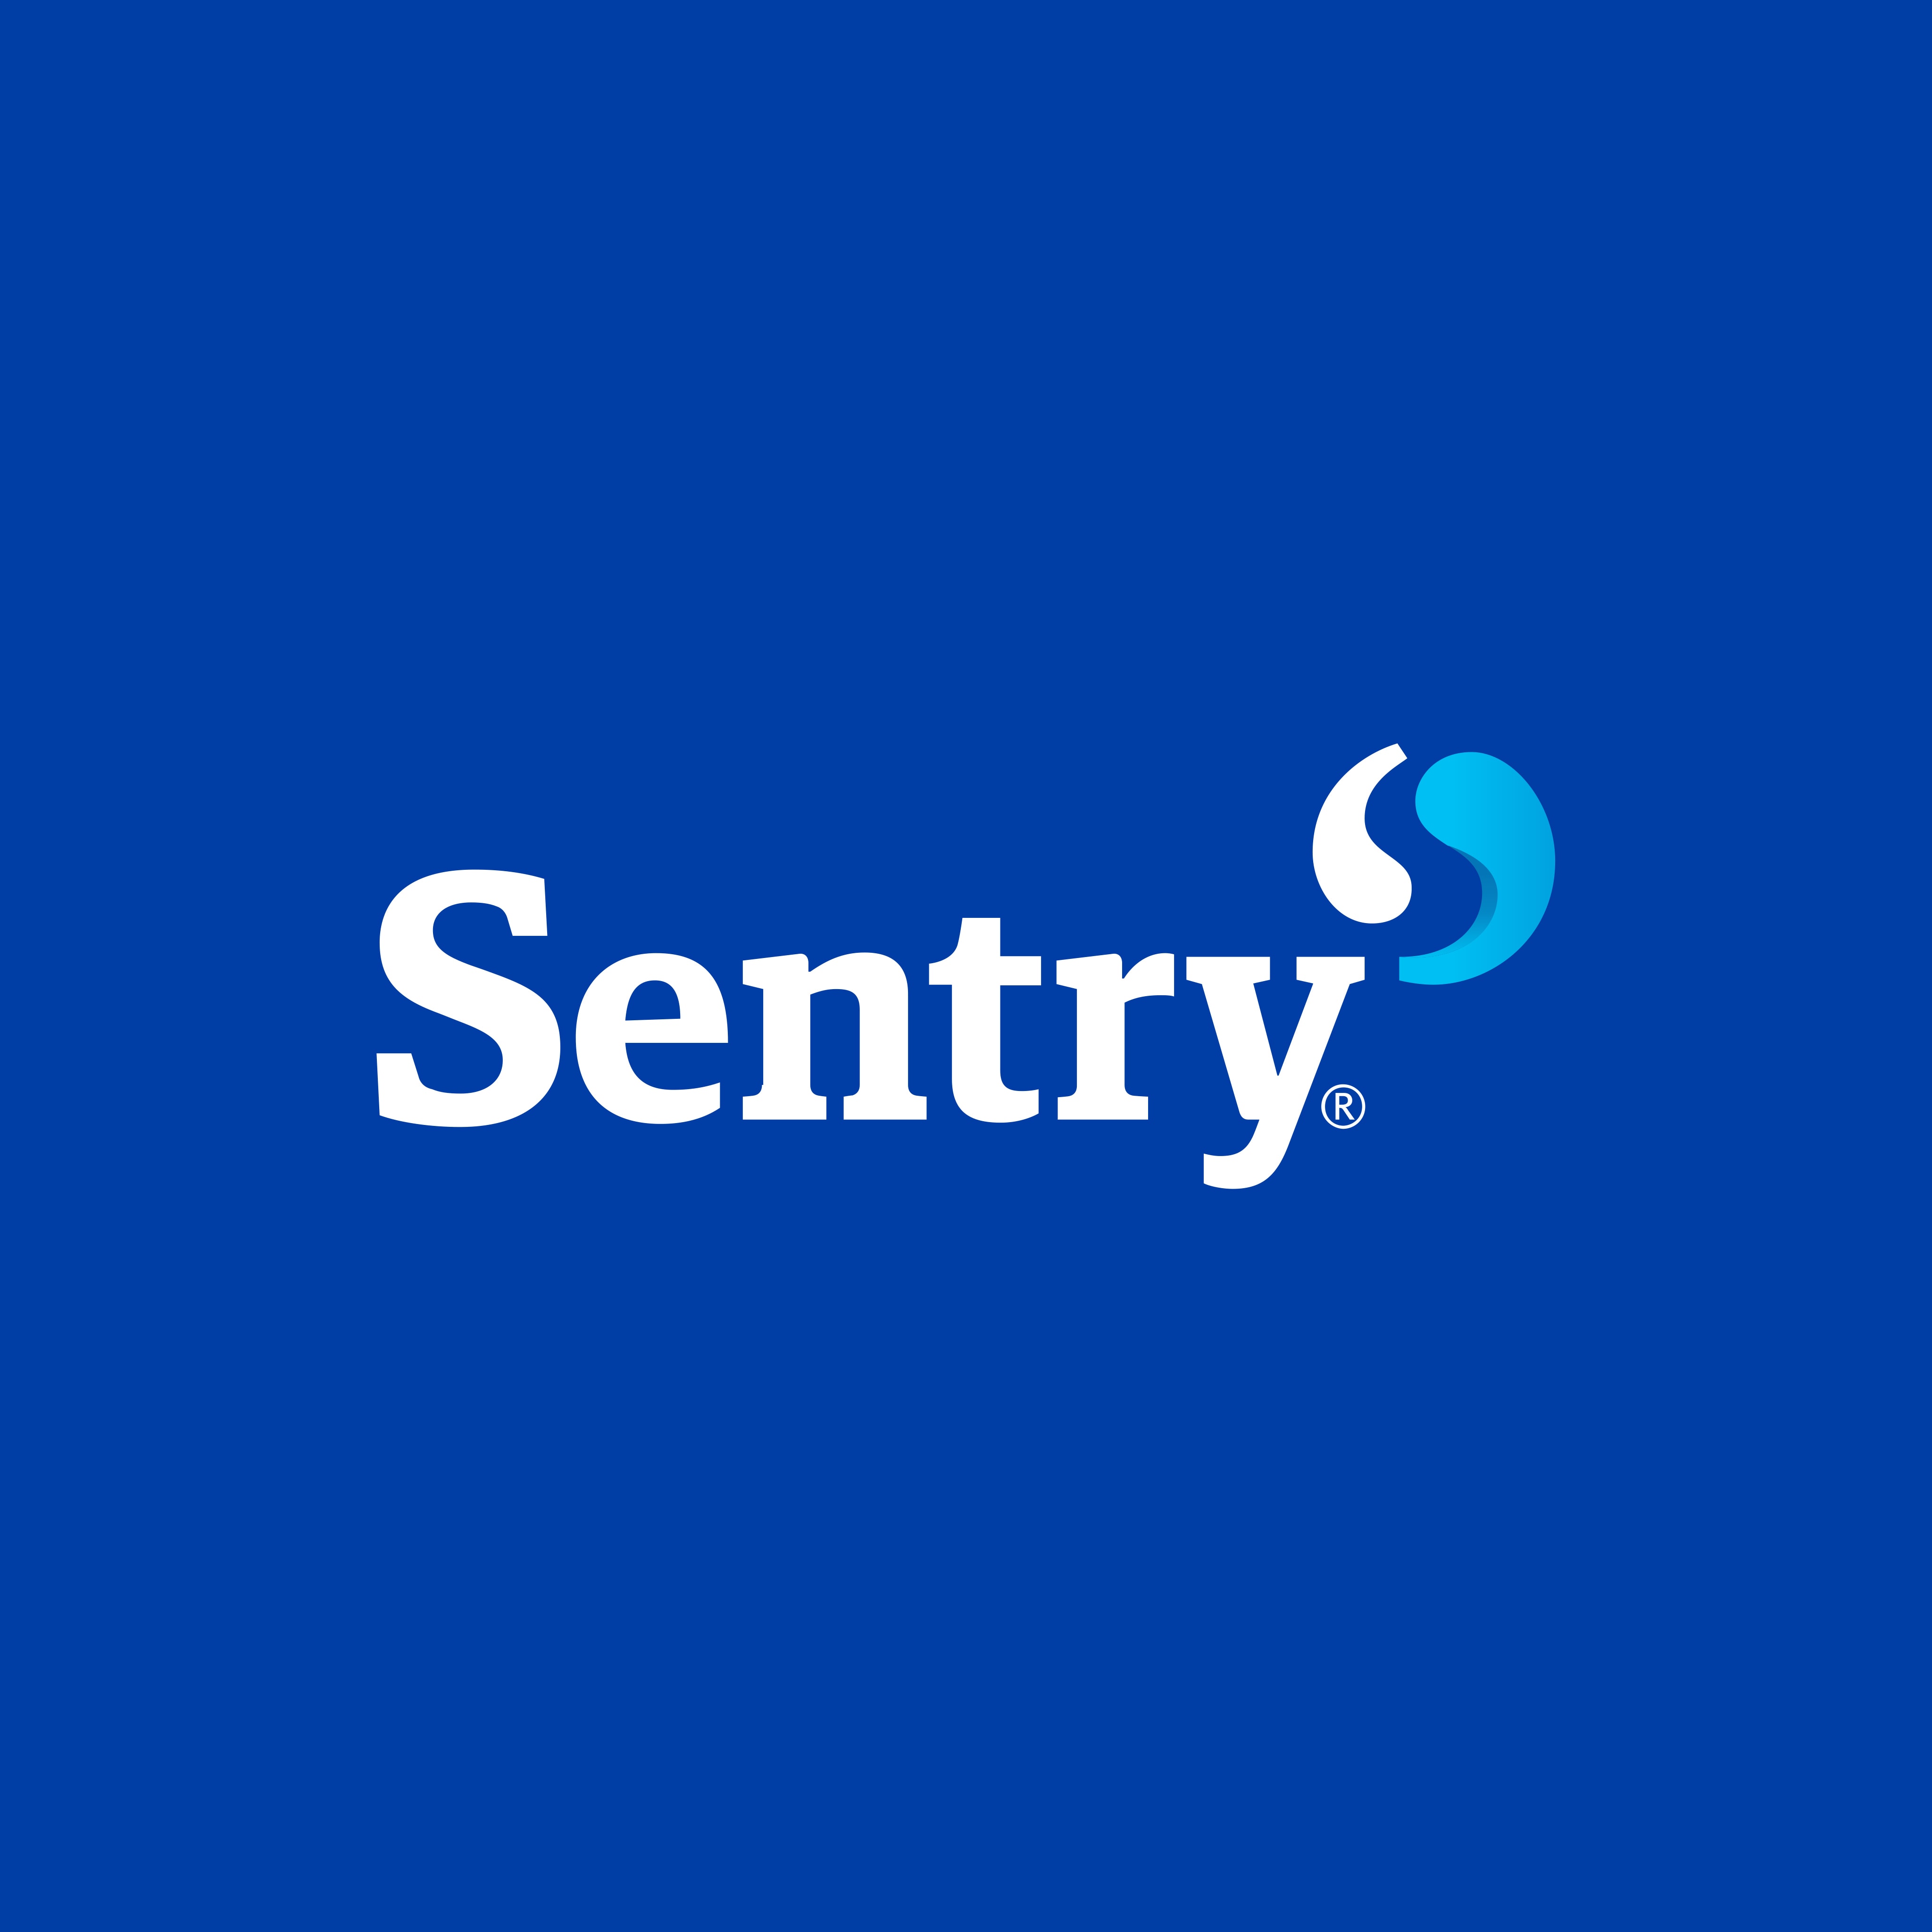 Sentry Insurance: Commercial and small business insurance